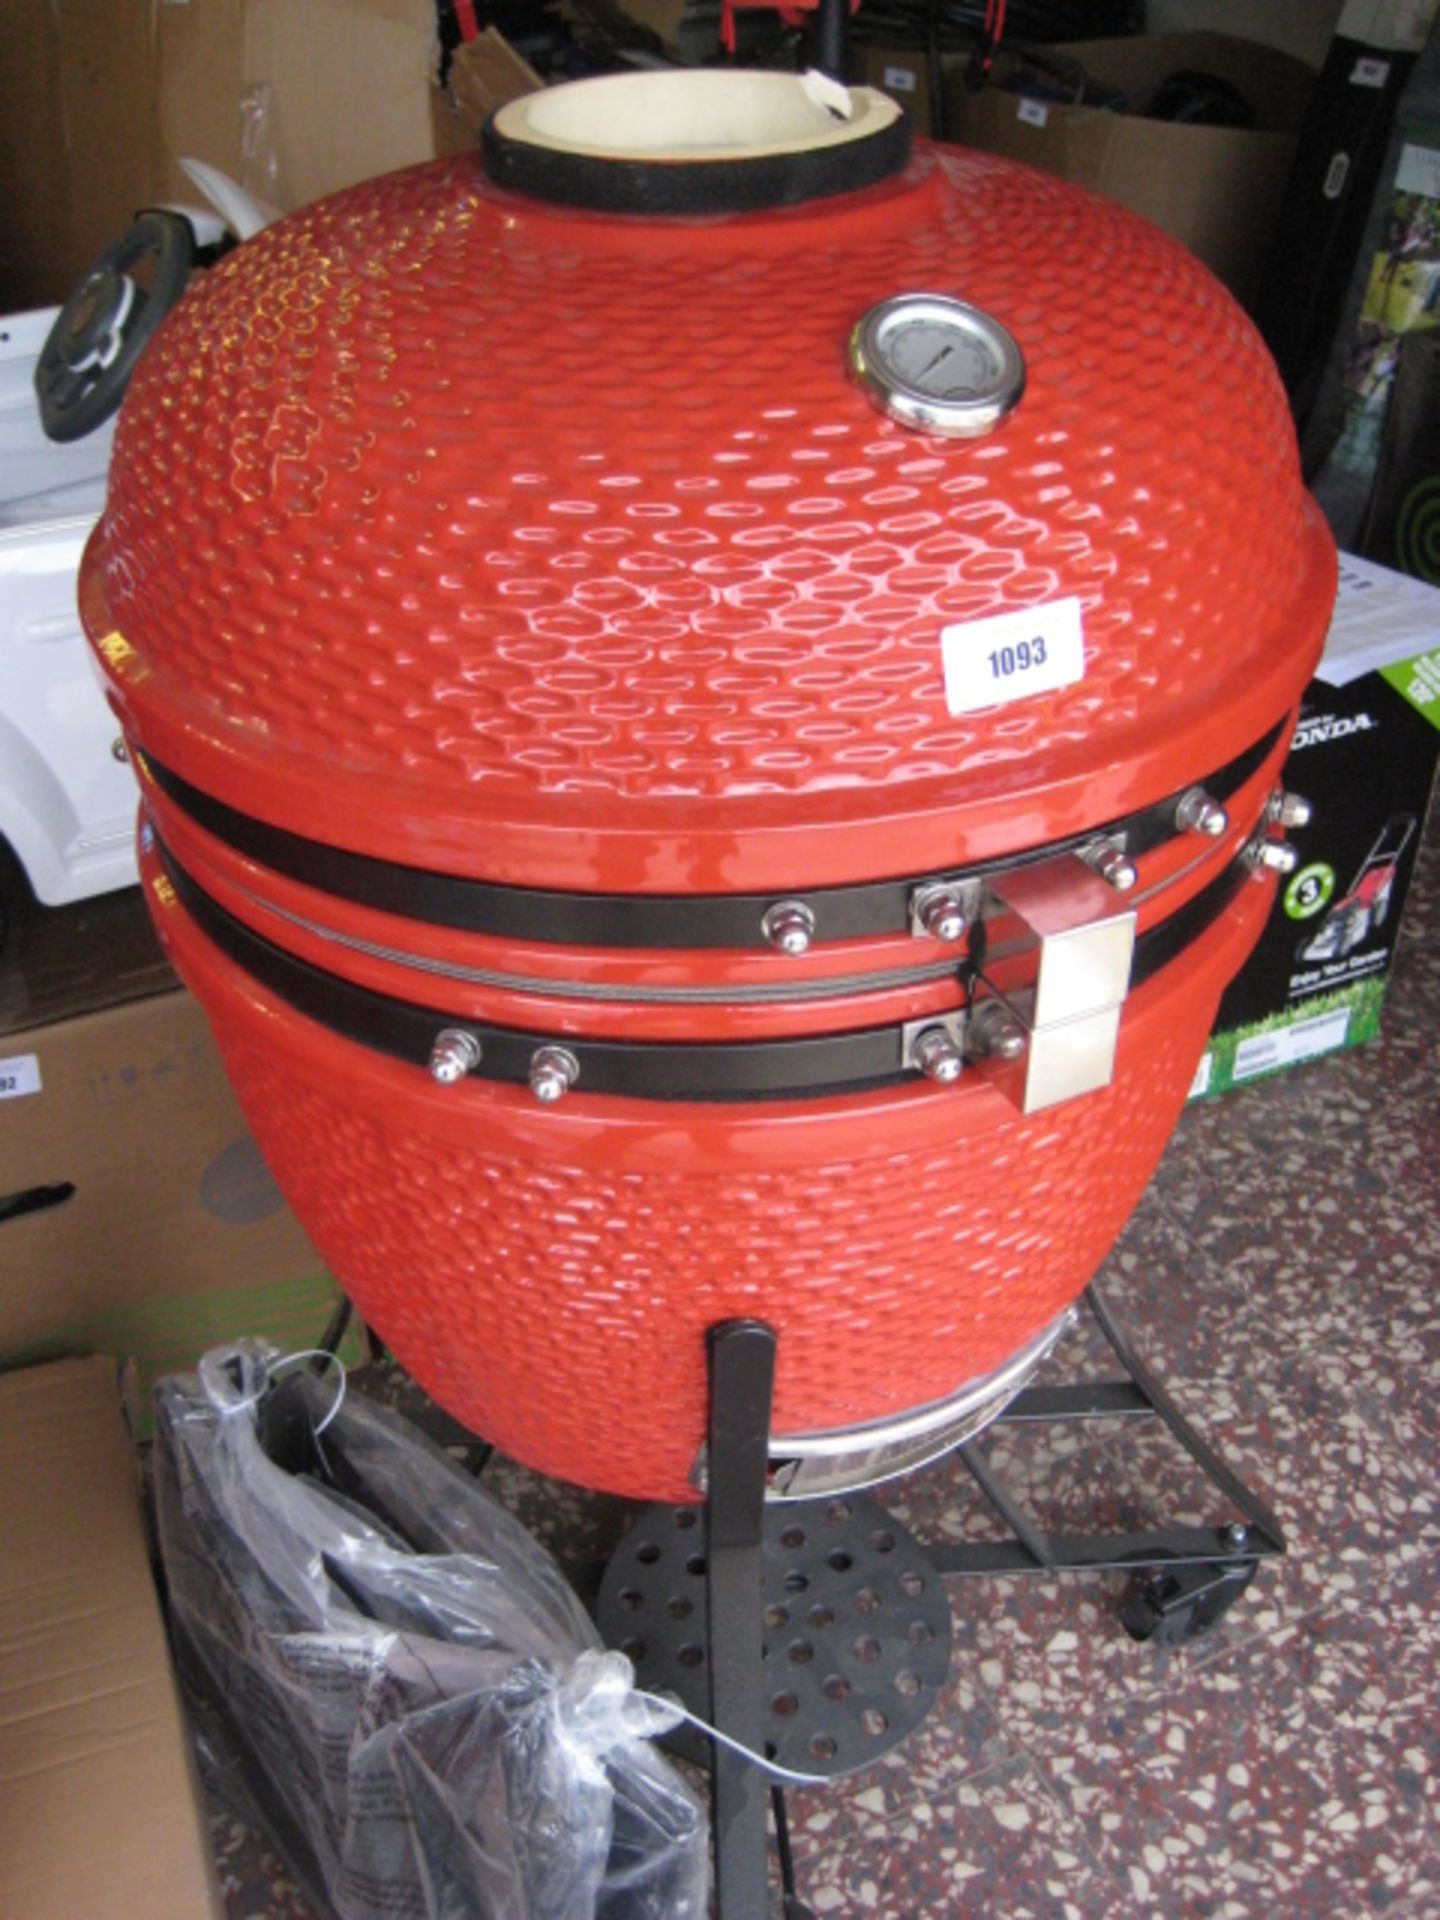 Louisiana ceramic charcoal grill in red with accessories inside